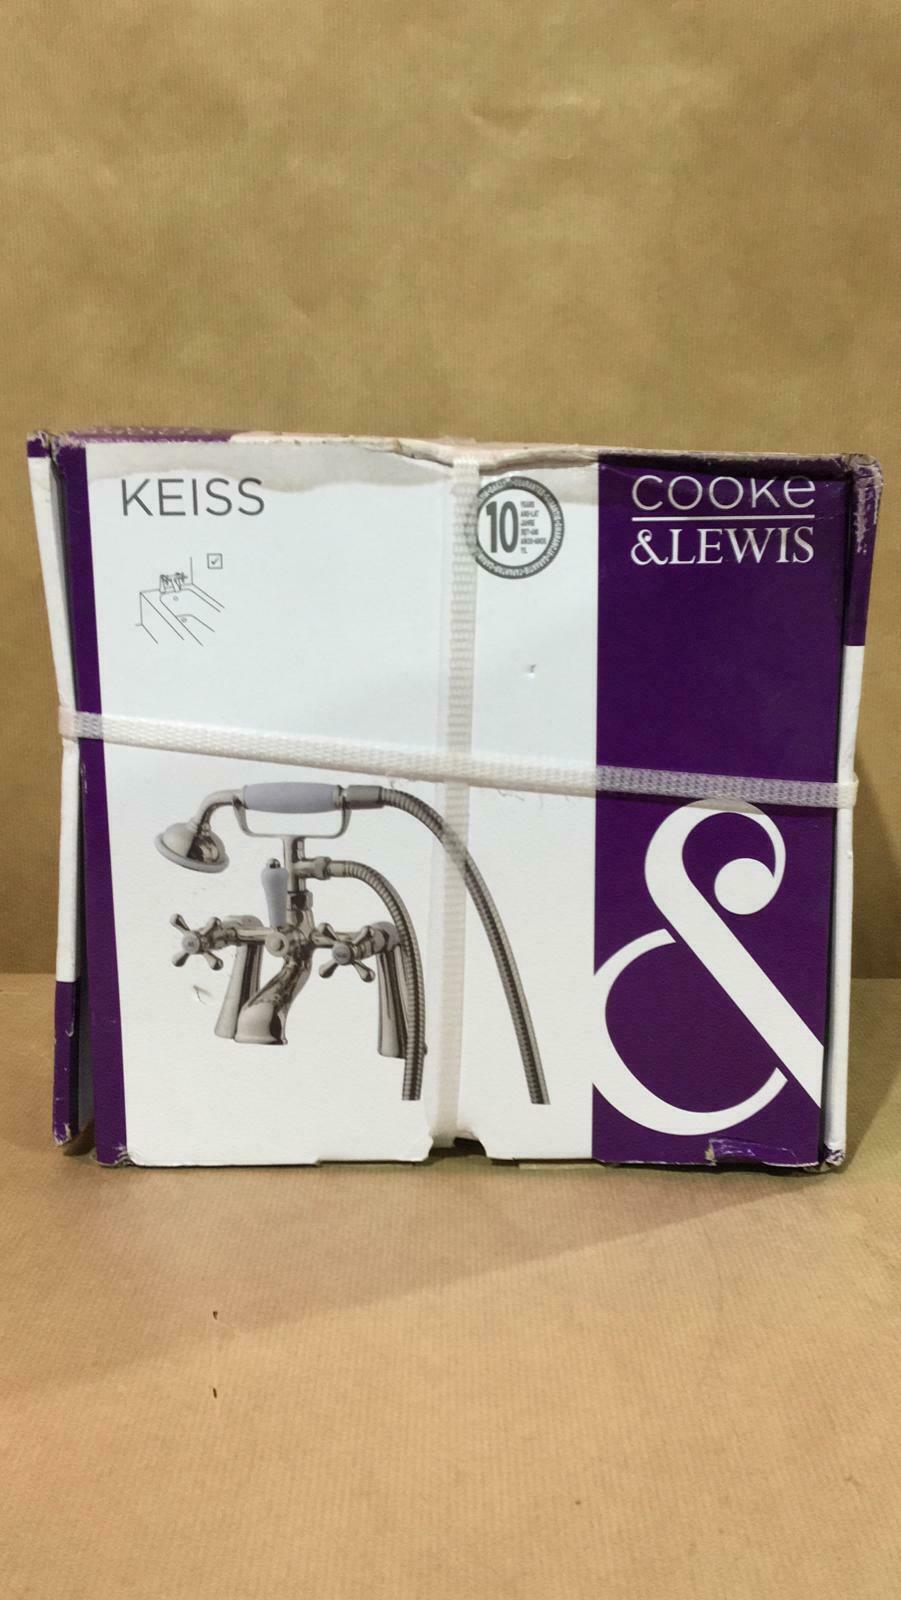 Cooke &amp; Lewis Keiss Gold effect Bath Shower mixer Tap-no-3767